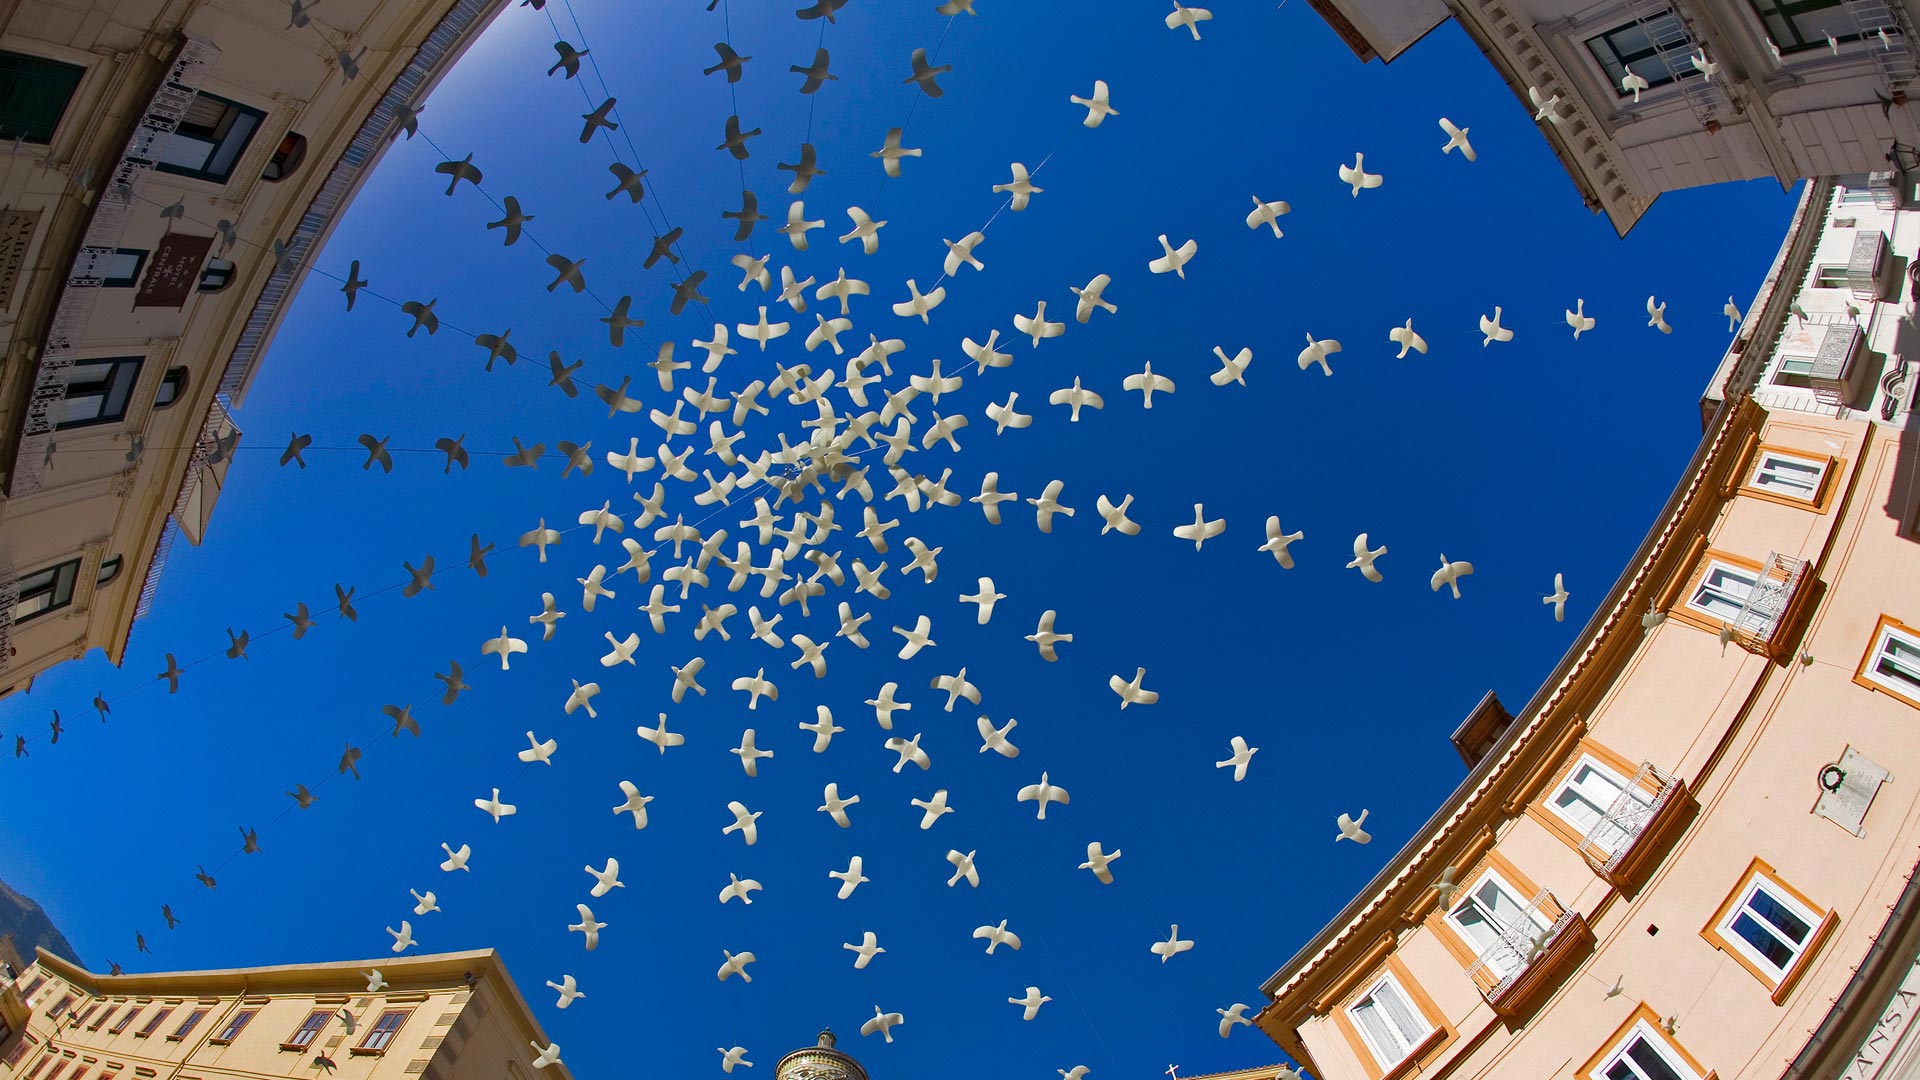 Doves Piazza